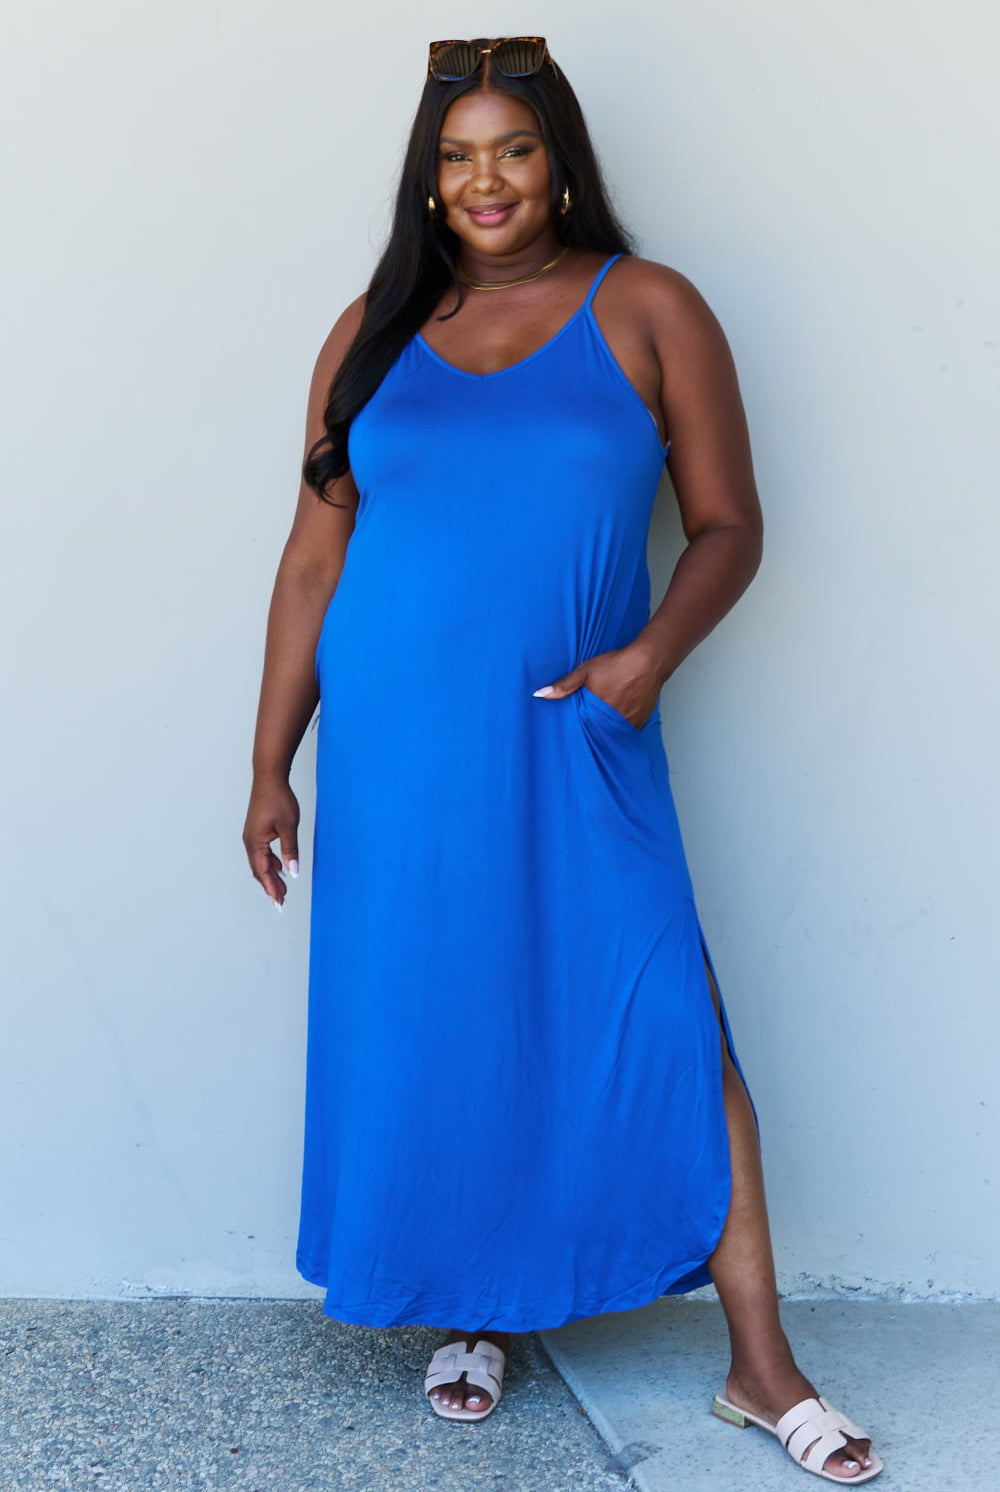 Ninexis Good Energy Full Size Cami Side Slit Maxi Dress in Royal Blue - GemThreads Boutique Ninexis Good Energy Full Size Cami Side Slit Maxi Dress in Royal Blue